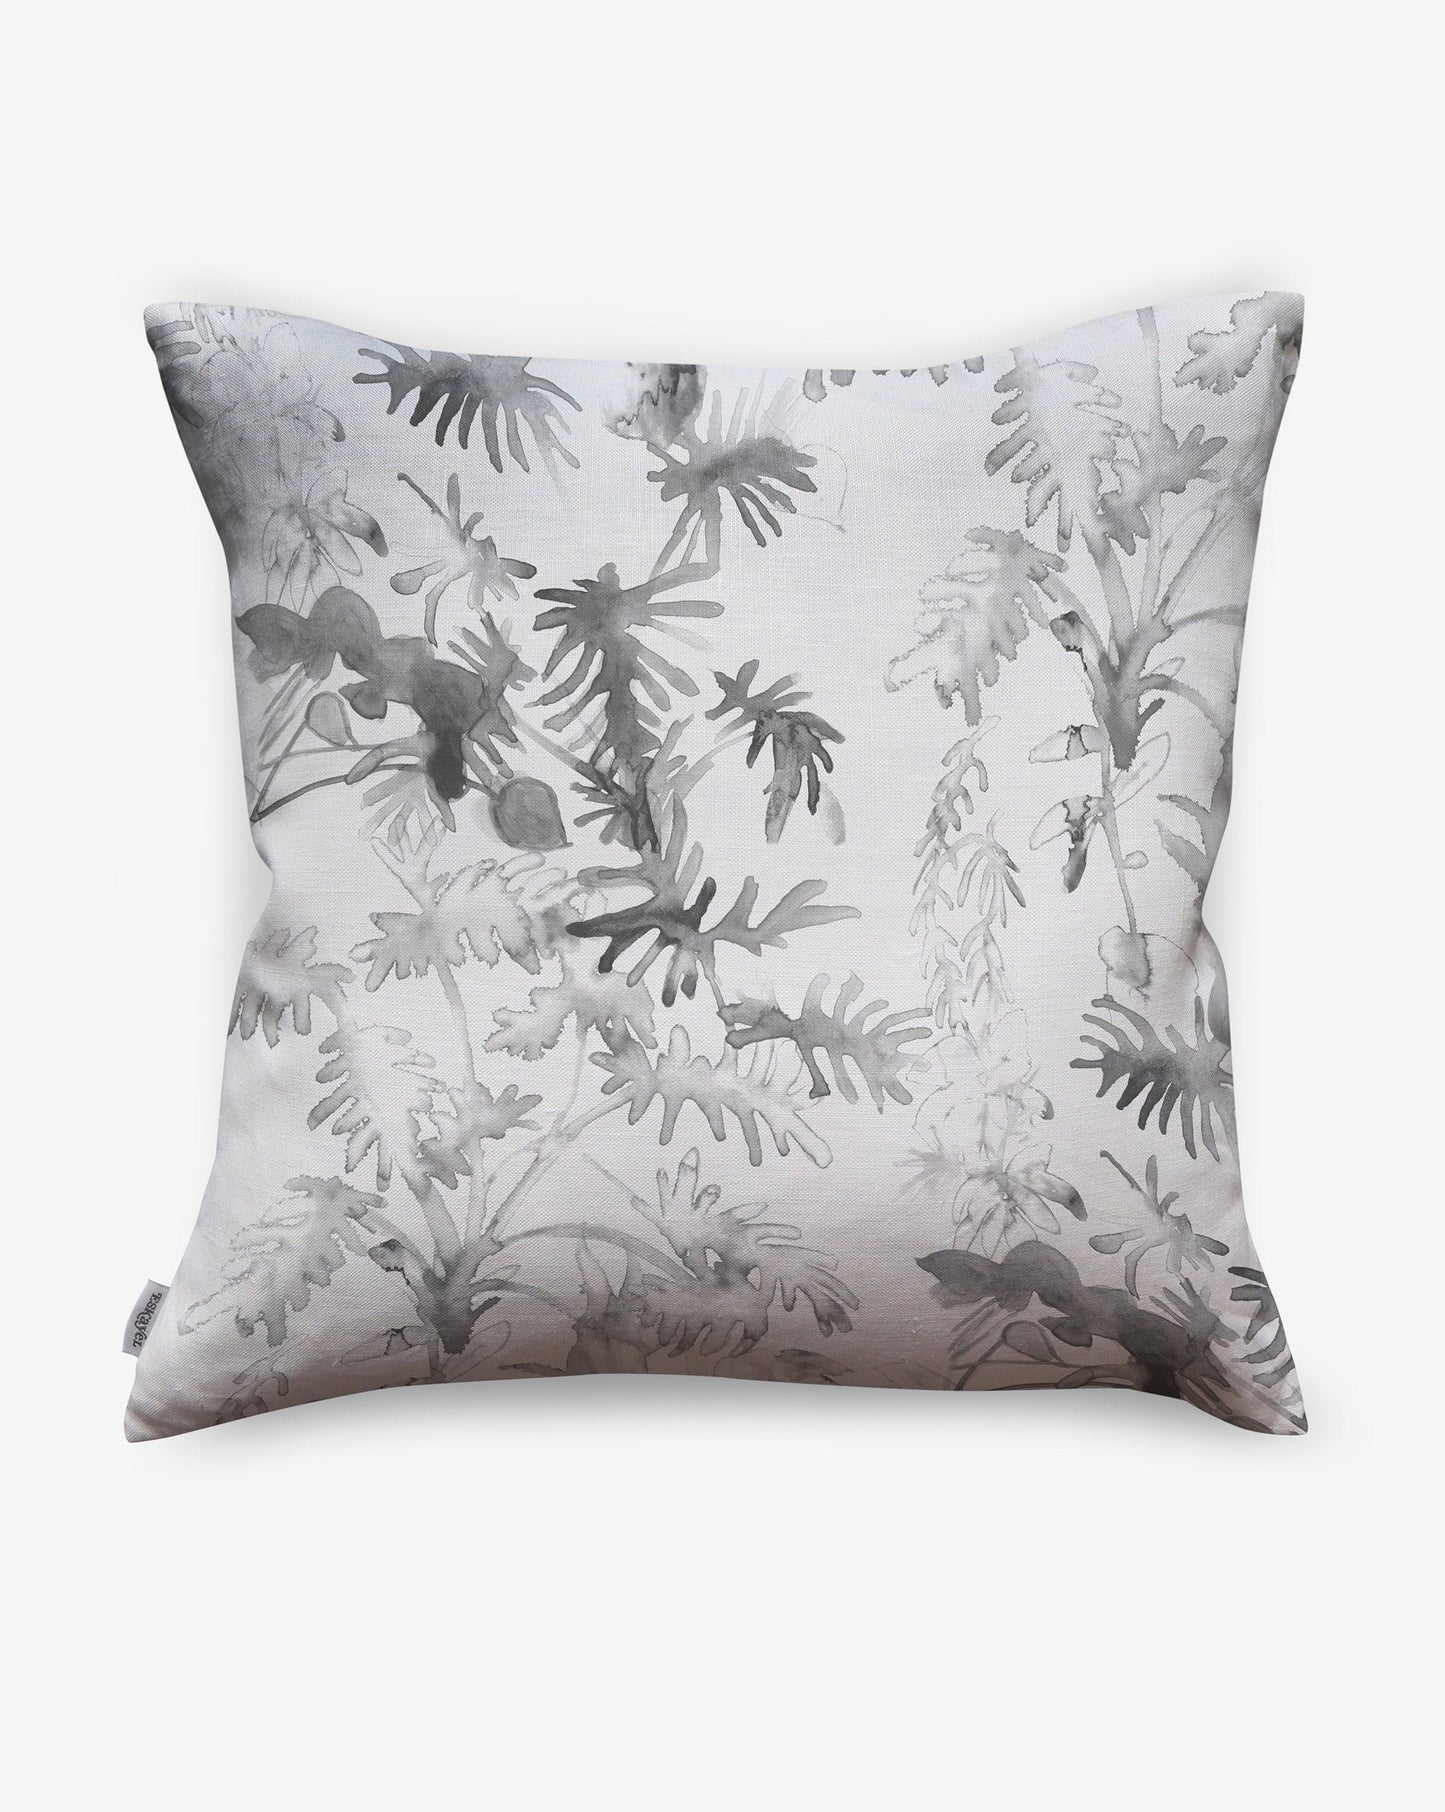 Topiary custom pillows in Birch feature houseplant silhouettes in grey and black. 